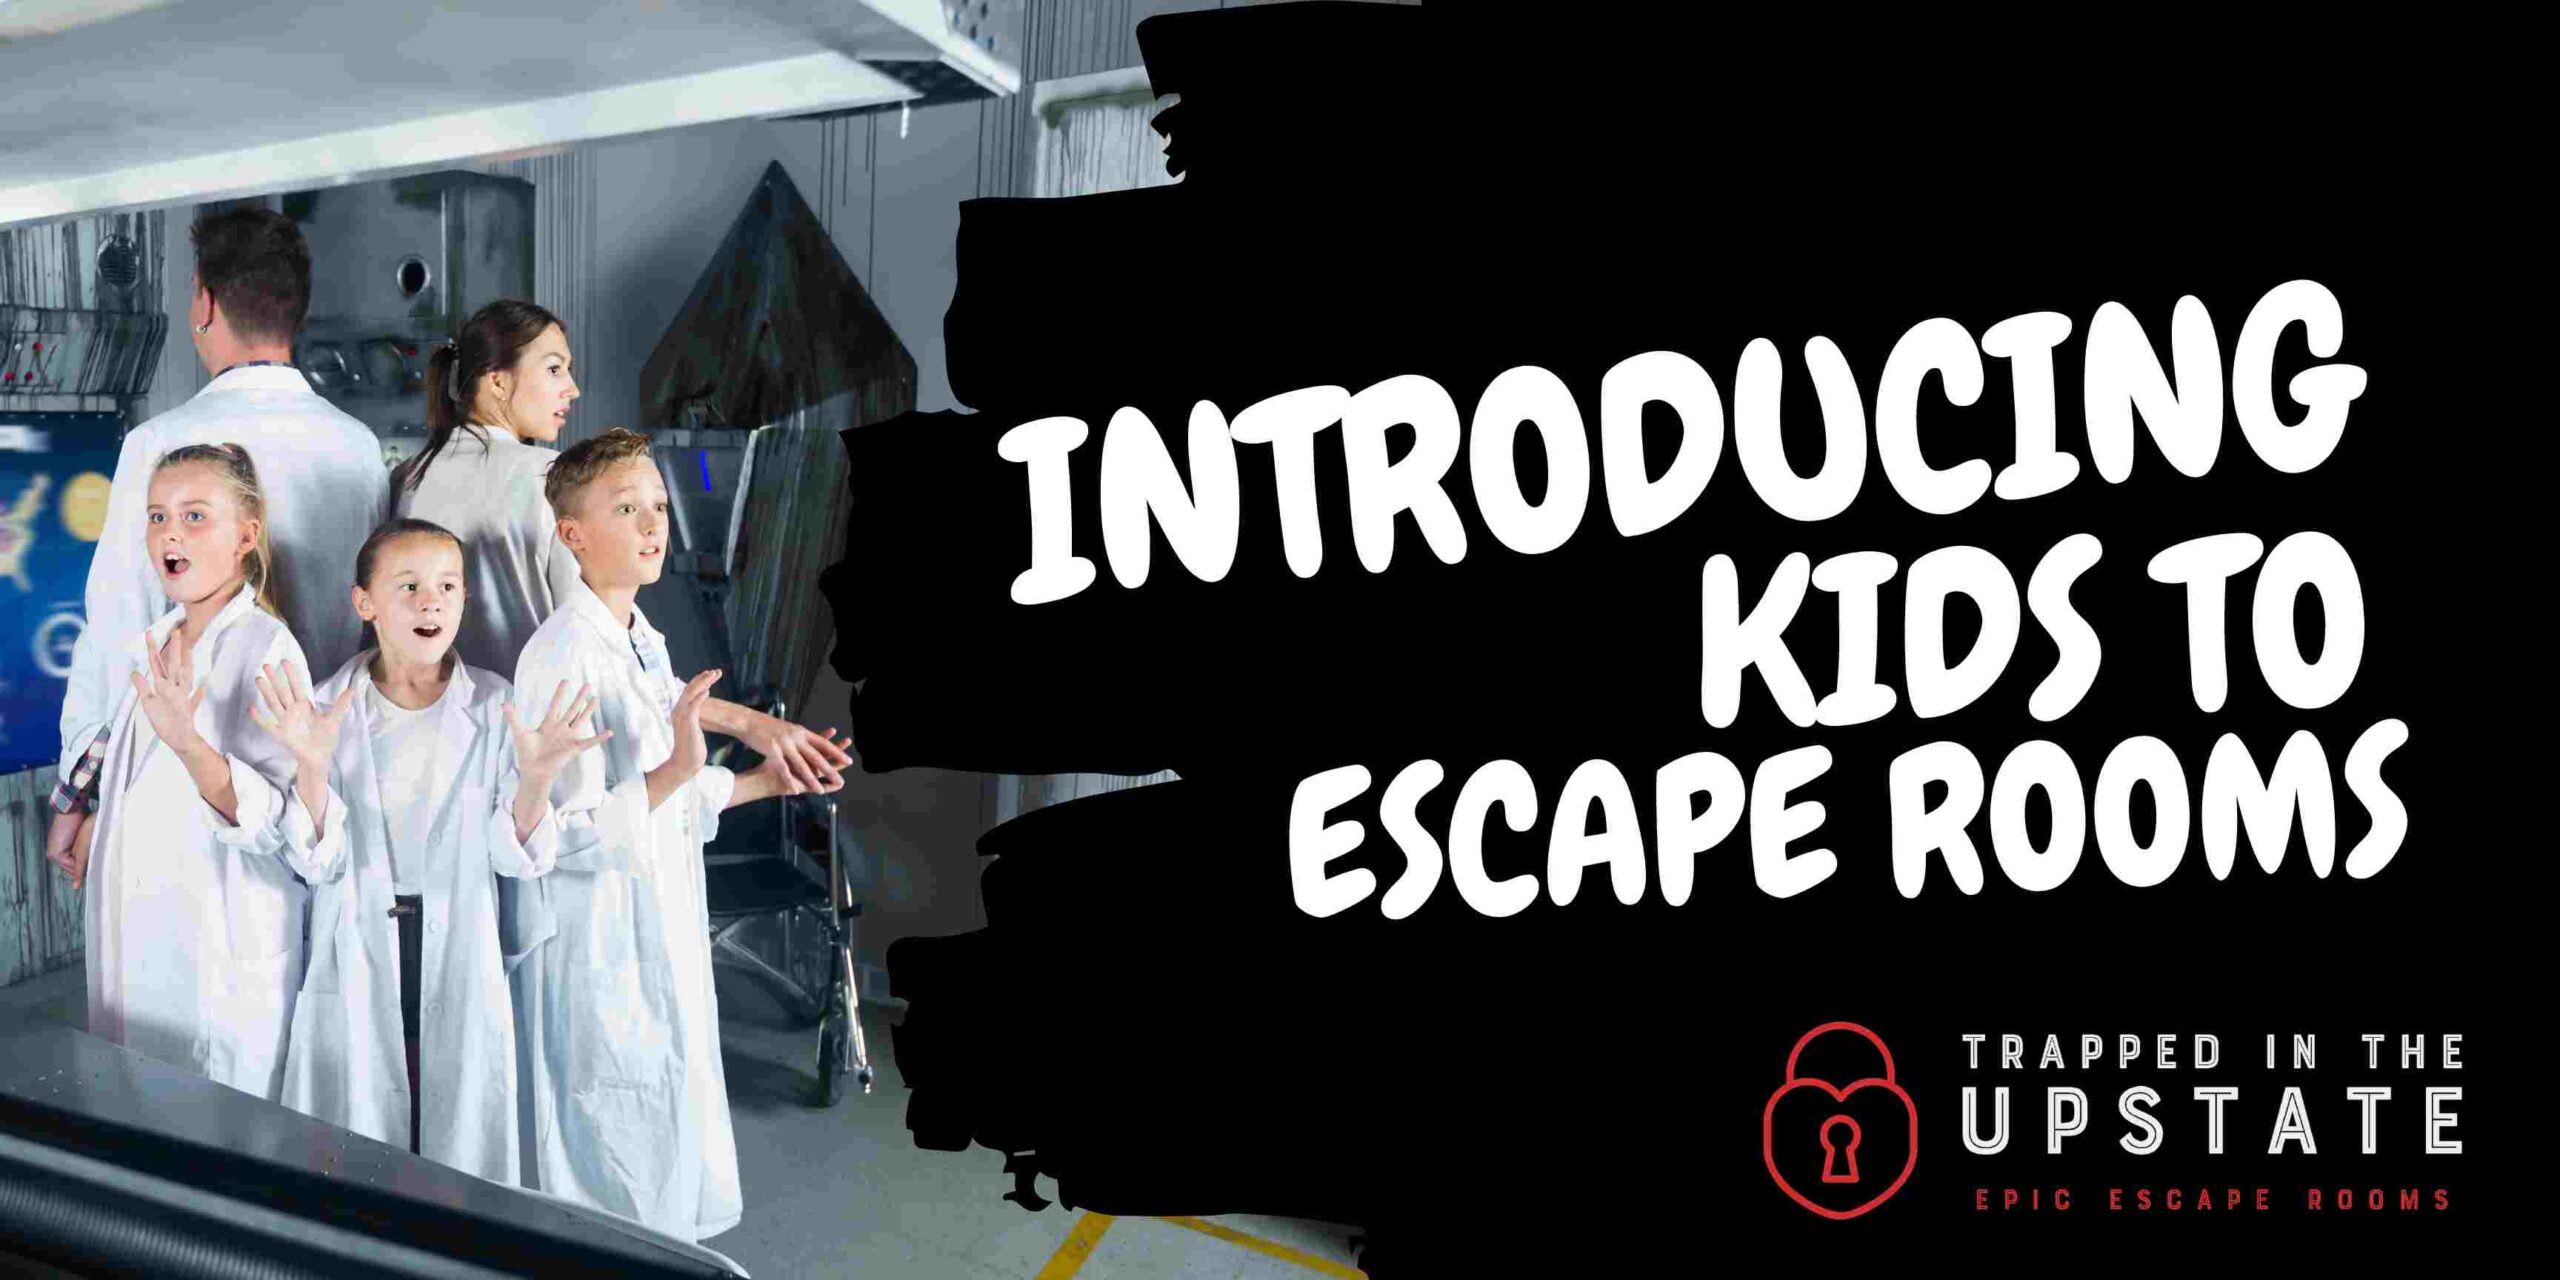 Introducing Kids to Escape Rooms